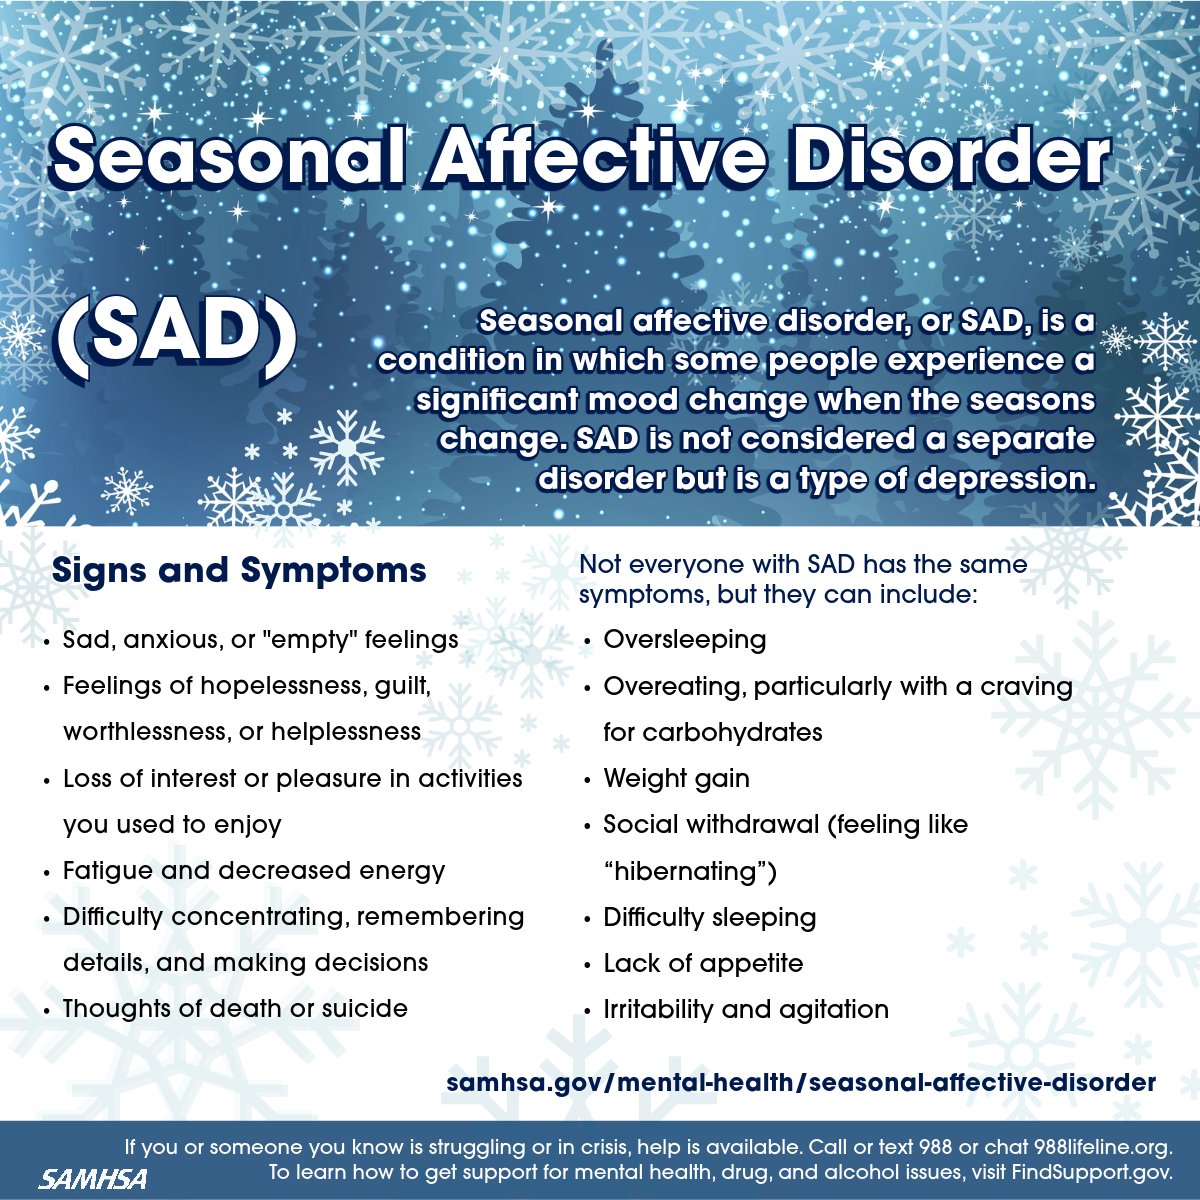 Oversleeping and social withdrawal (feeling like “hibernating”) are some of the symptoms of seasonal affective disorder (SAD). Learn more about SAD and how to get help: samhsa.gov/mental-health/…